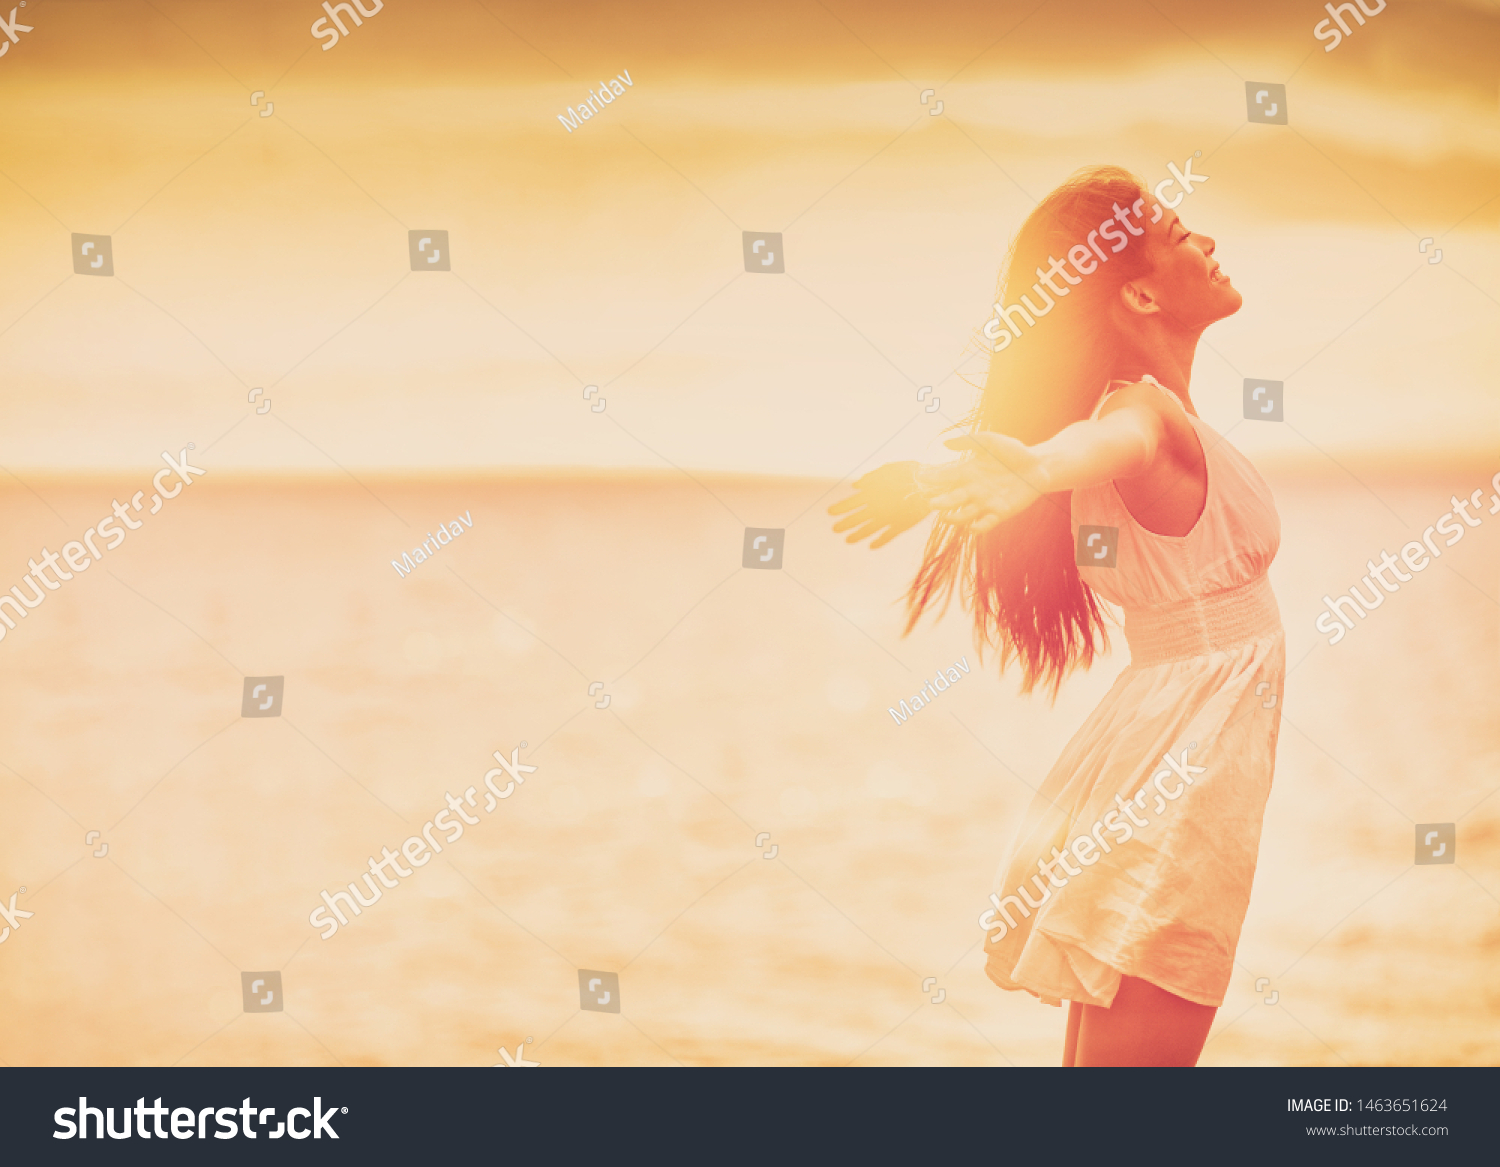 Wellness woman feeling free with open arms in freedom side profile silhouette on ocean beach background. Stress free happy emotion people. #1463651624